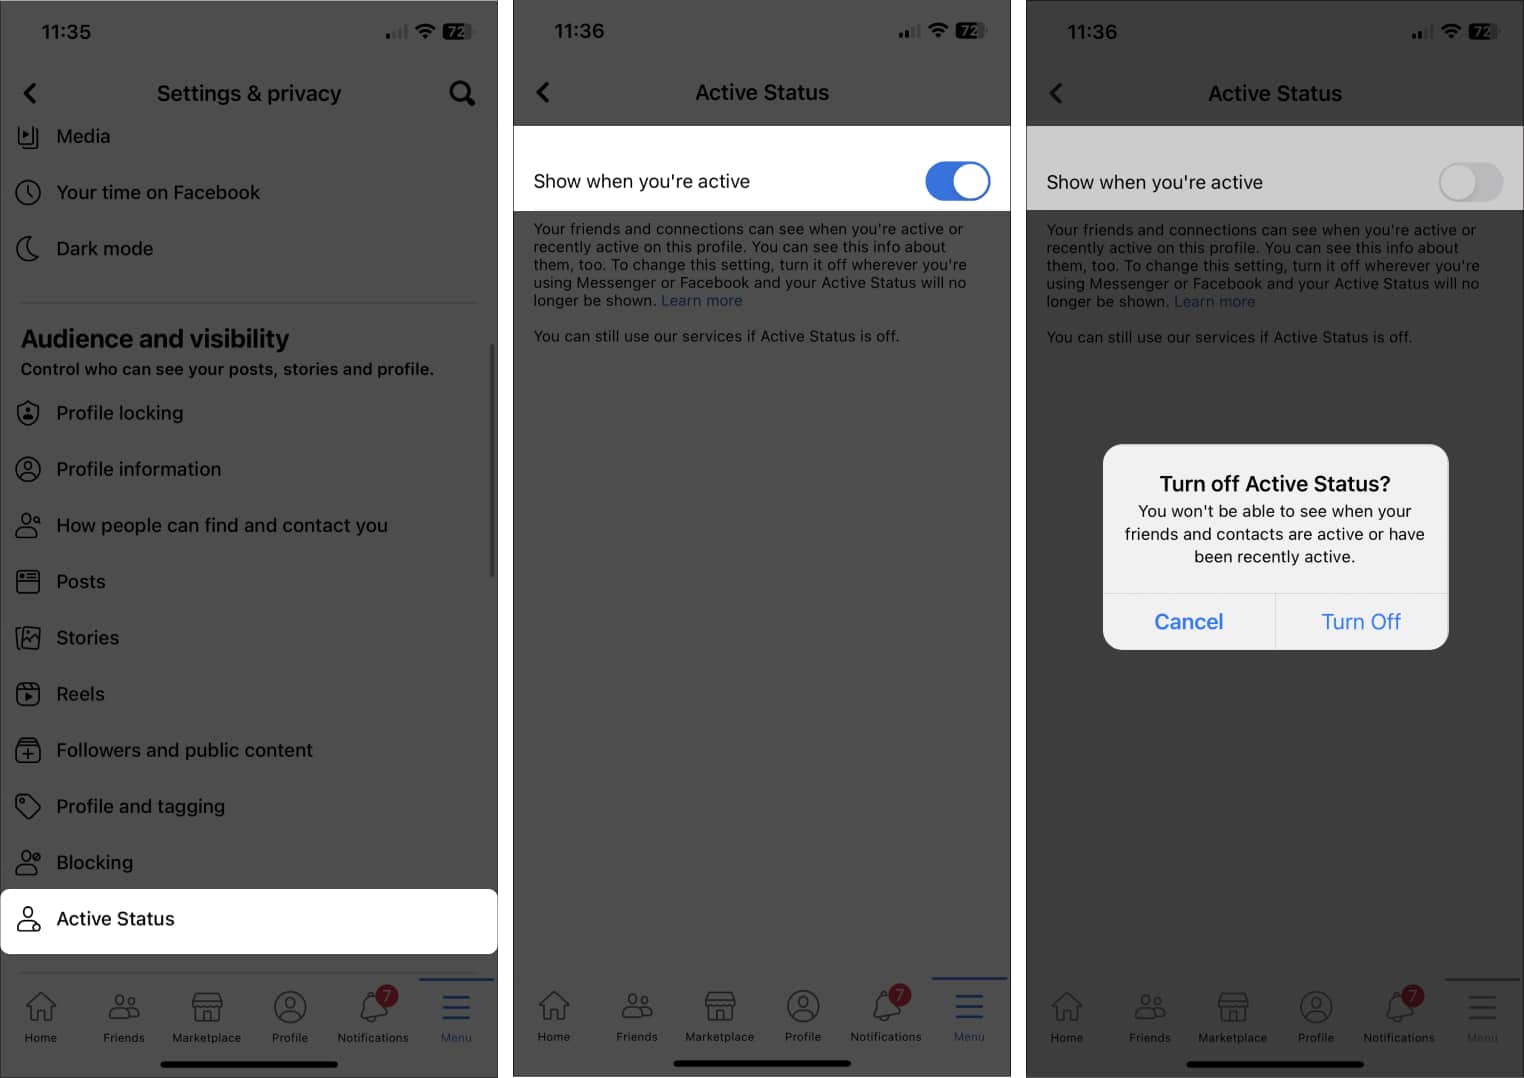 Turn your Active Status off from Facebook app on iPhone